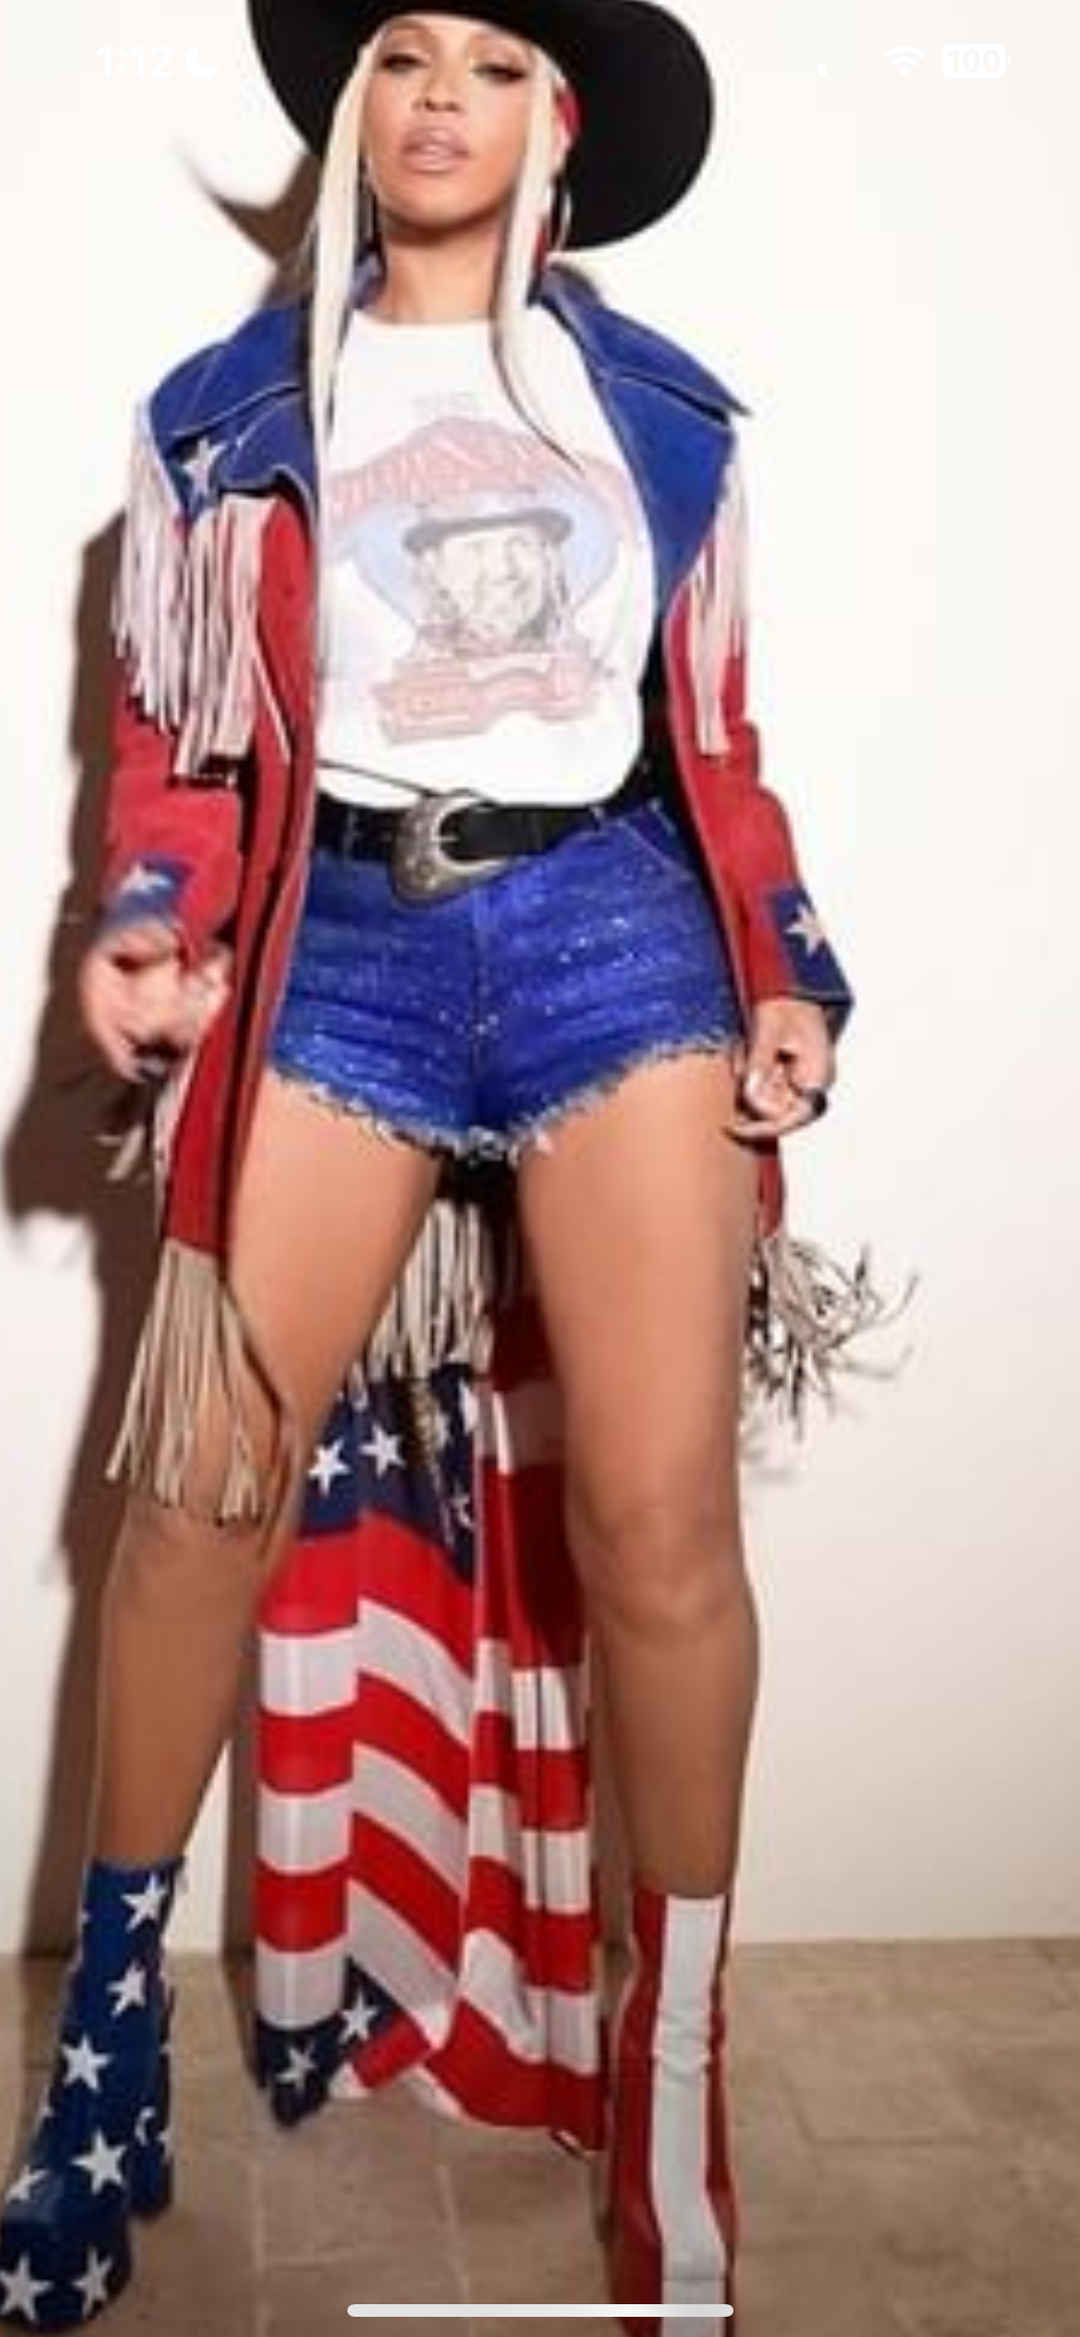 Willie Nelson Texas with Love Tee (as worn by Beyonce)